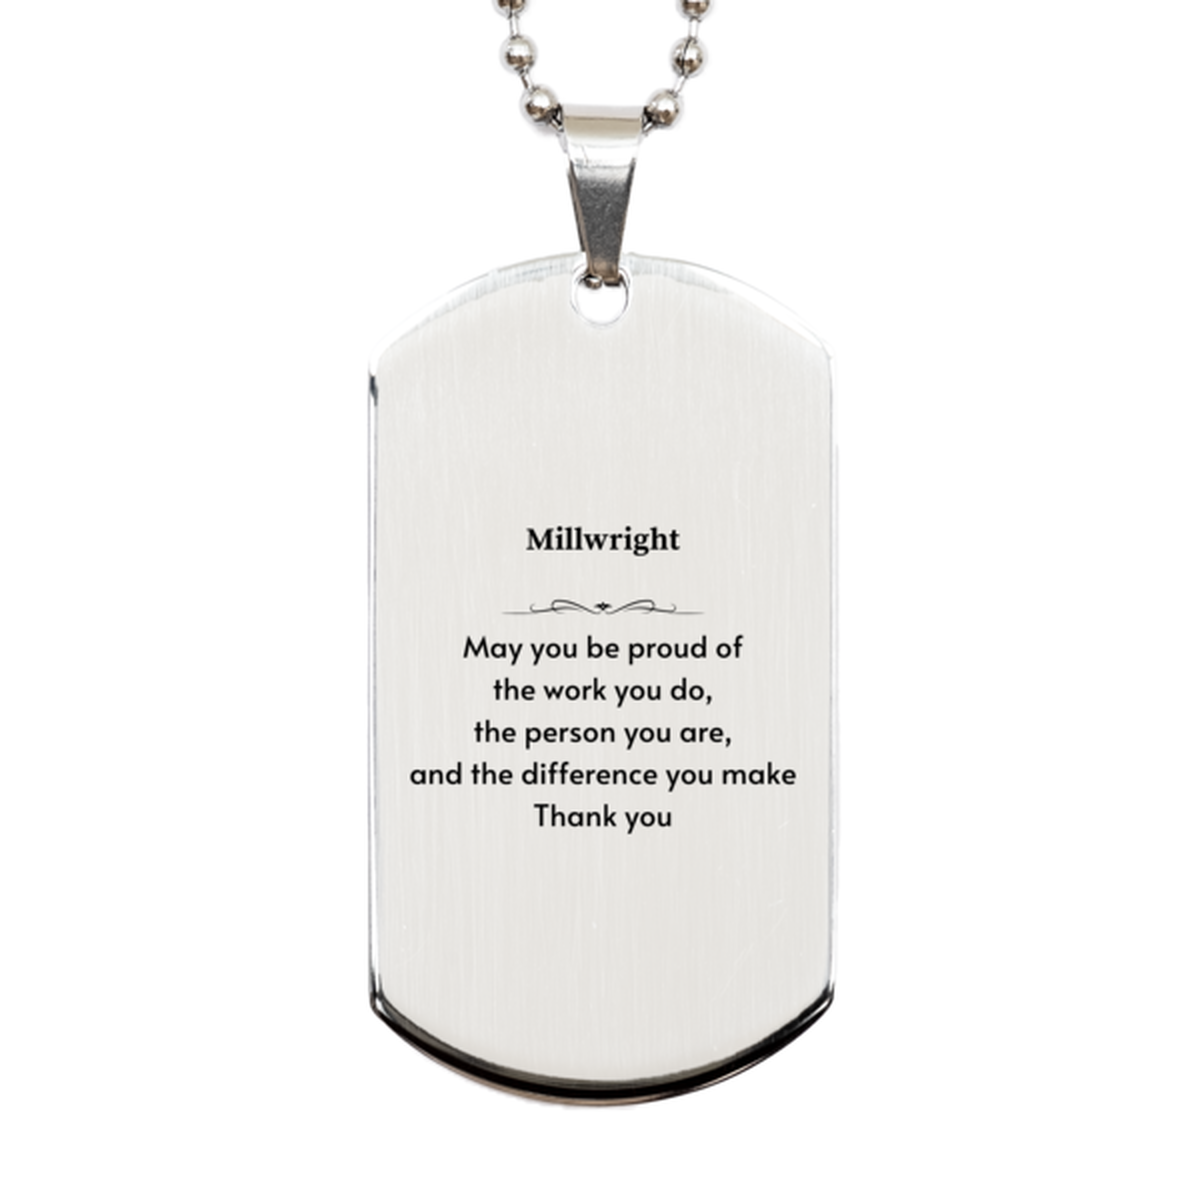 Heartwarming Silver Dog Tag Retirement Coworkers Gifts for Millwright, Millwright May You be proud of the work you do, the person you are Gifts for Boss Men Women Friends